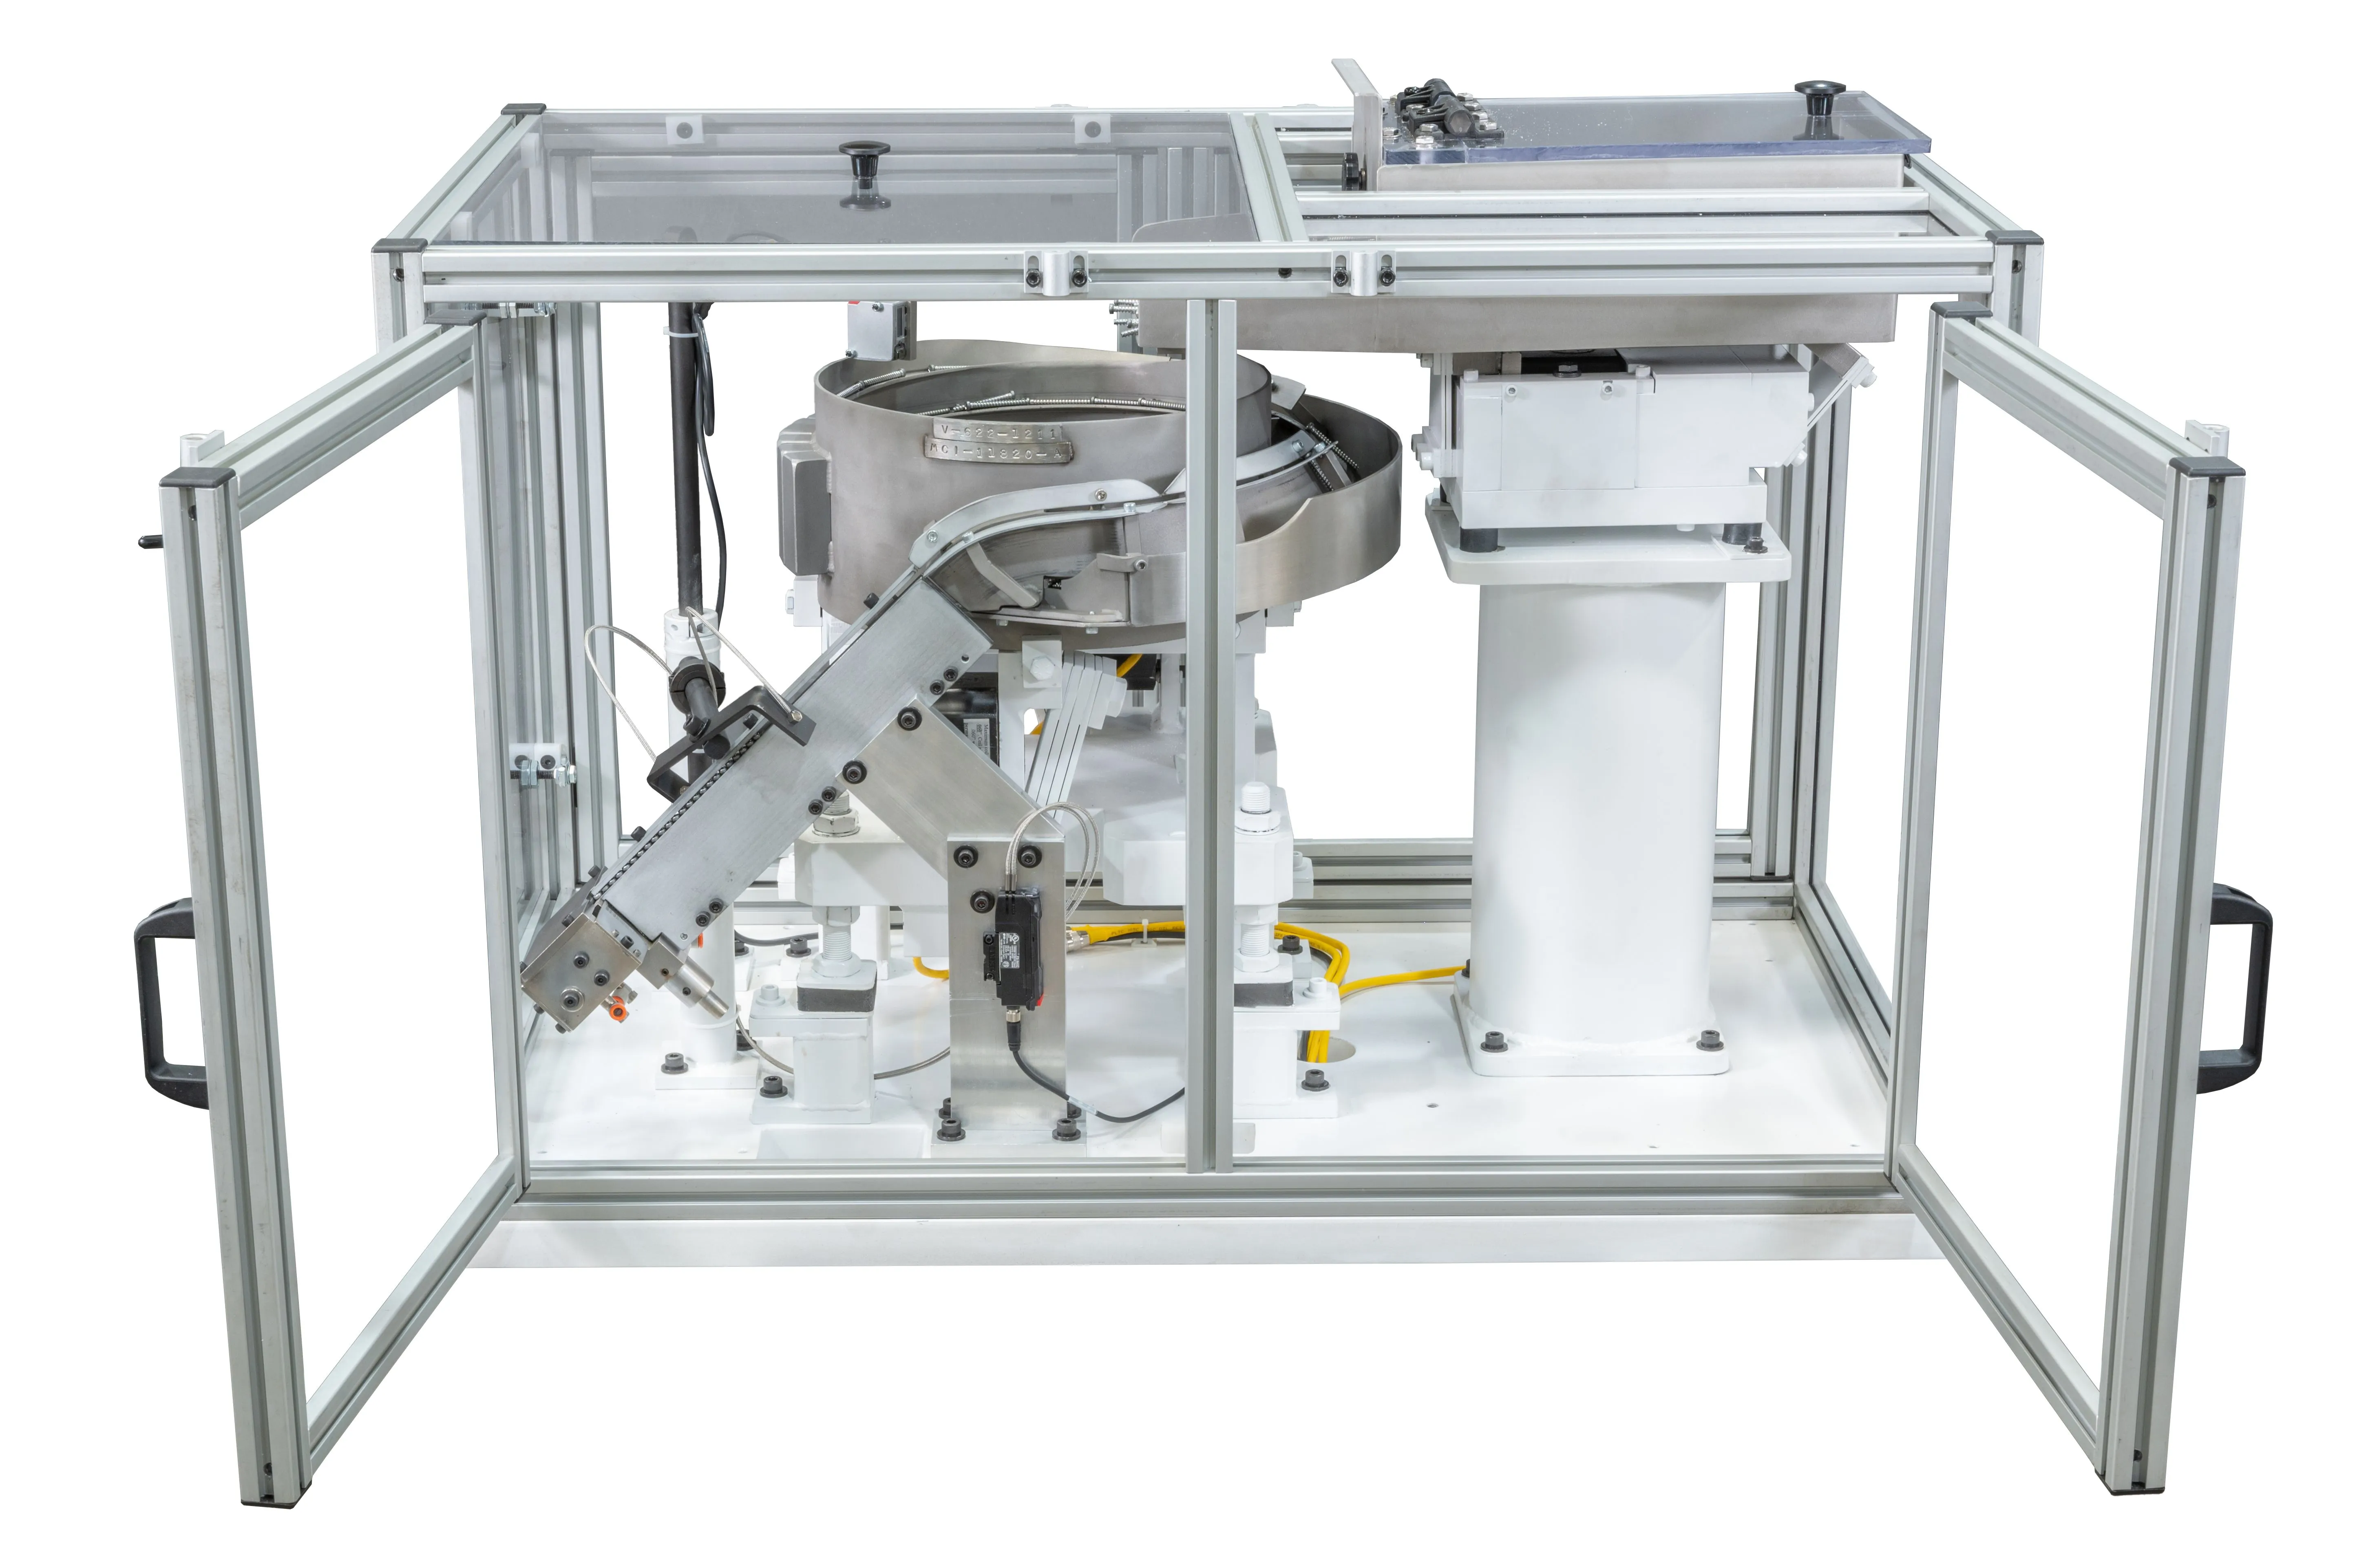 Industrial robotic arm assembly within a metal frame structure, isolated on a white background.